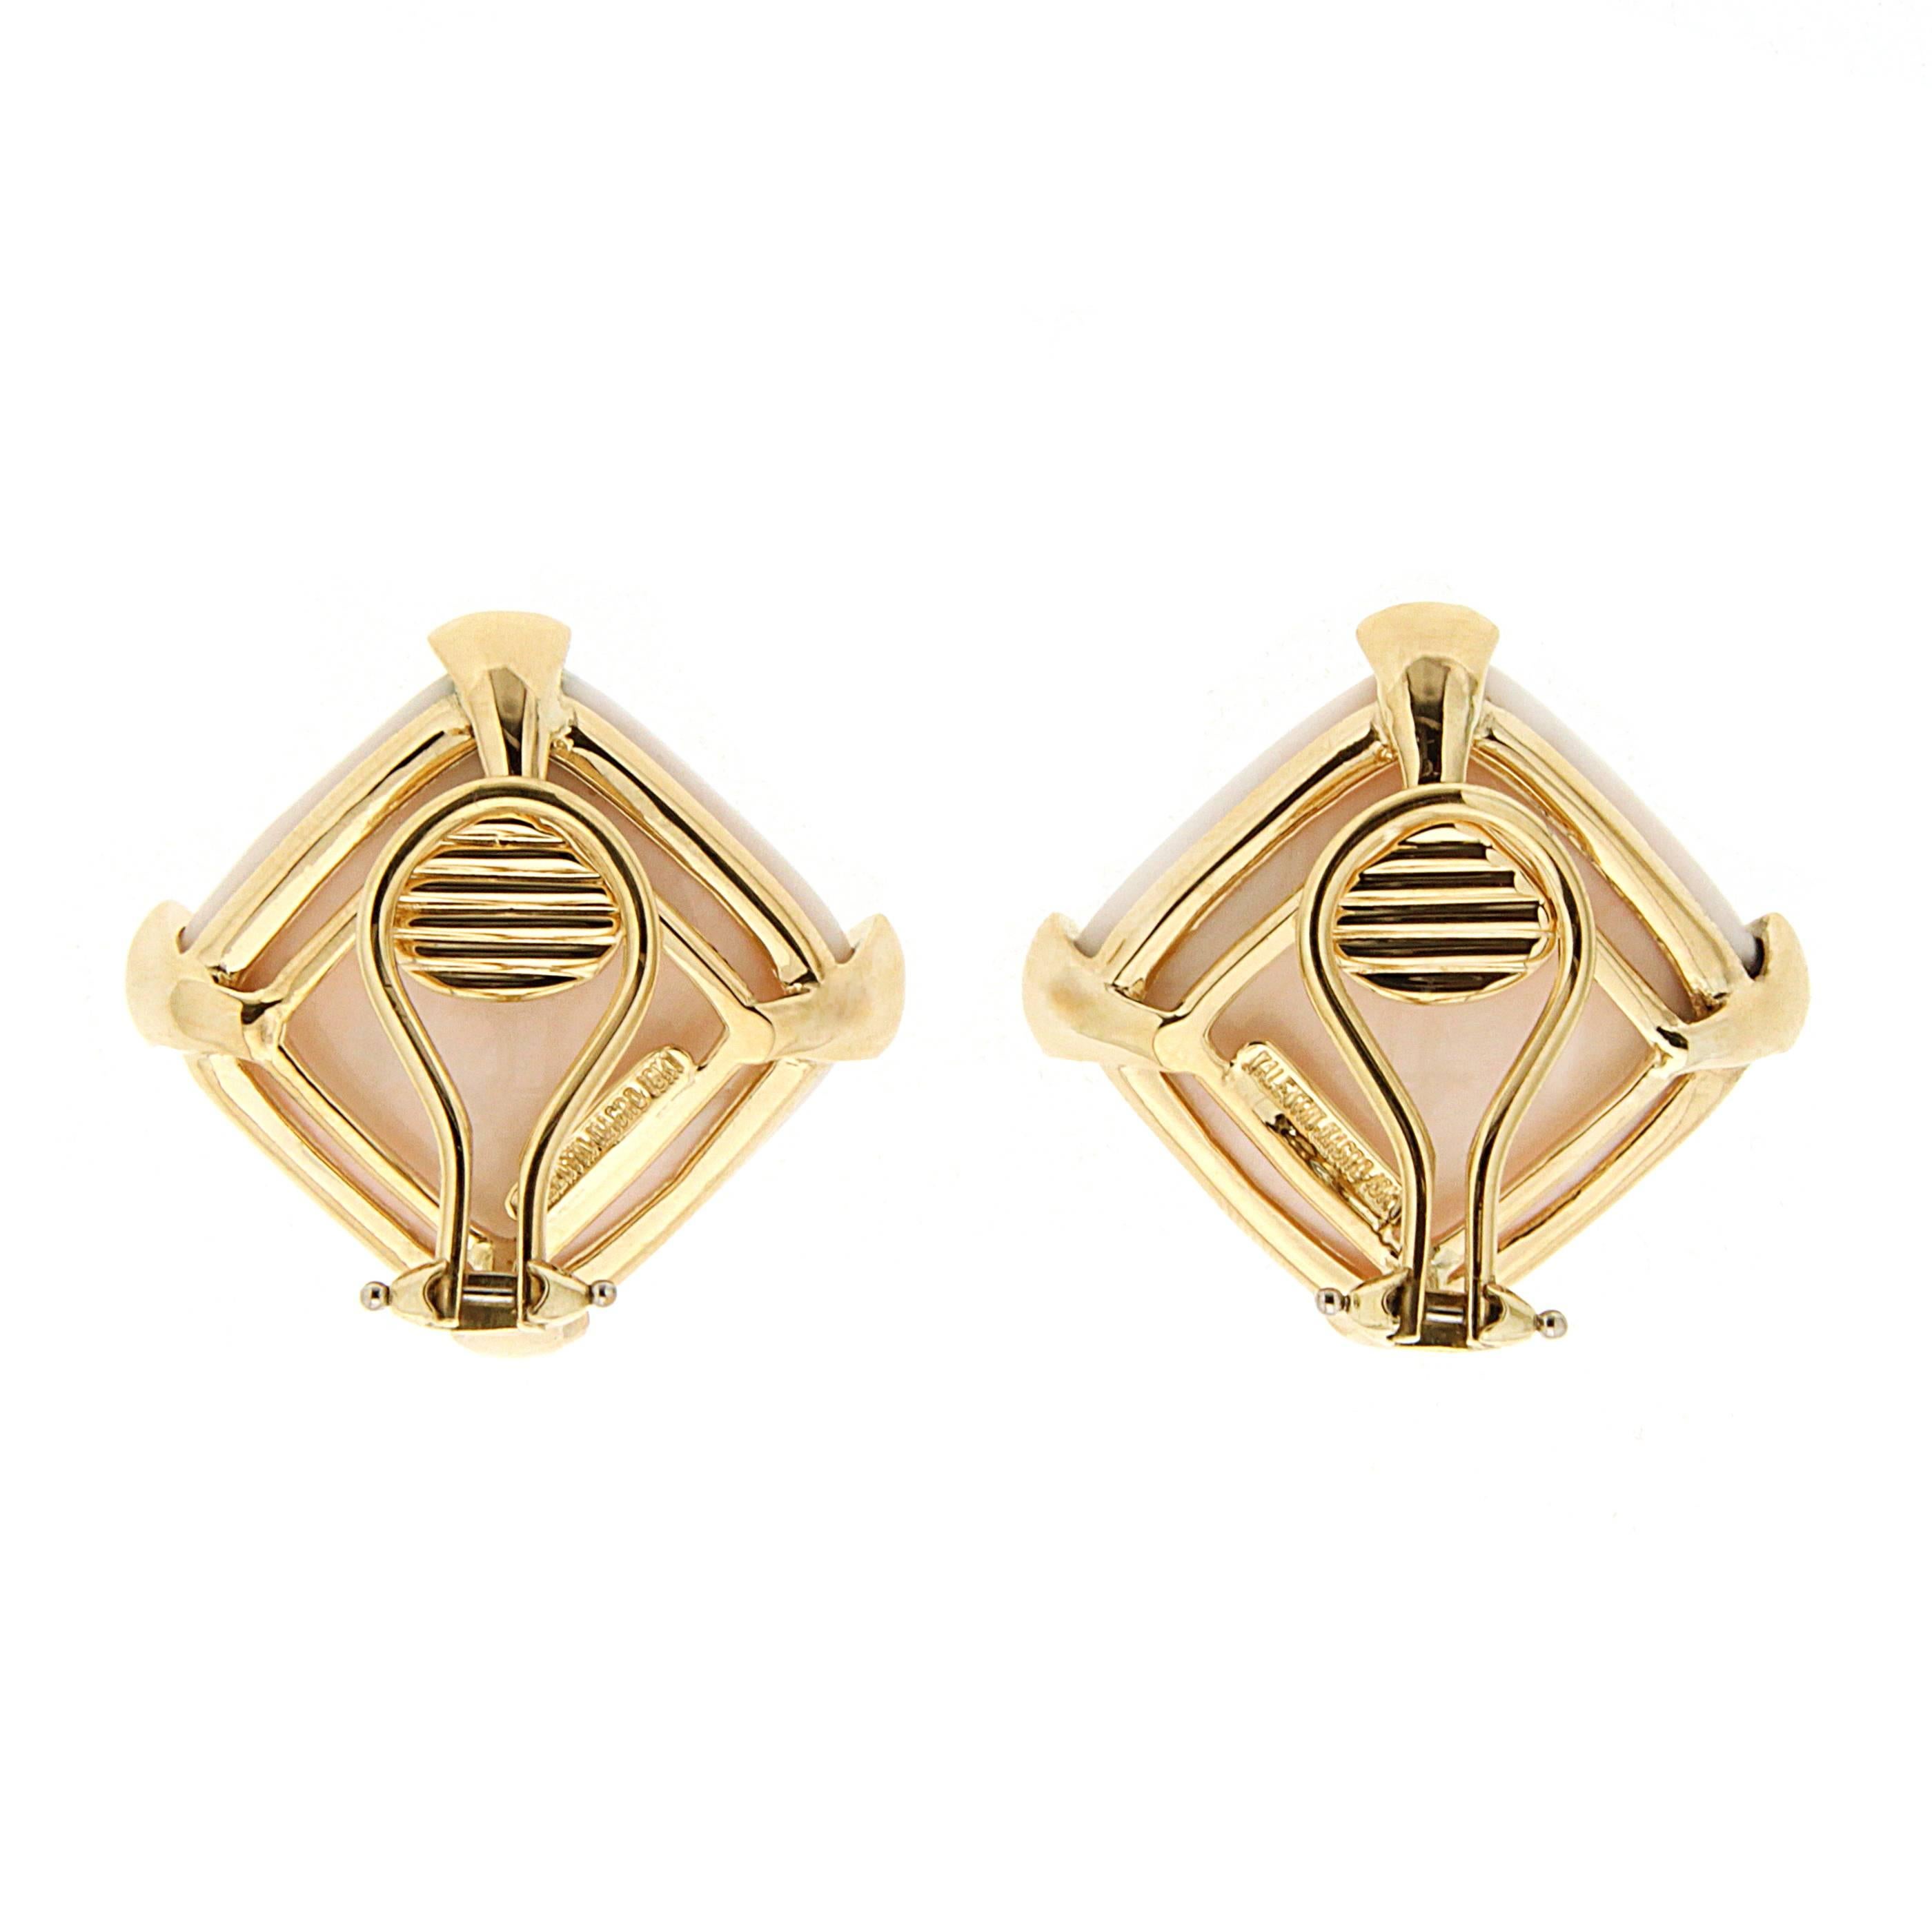 This lovely pair of earrings feature Cushion white coral (20mm) button earrings decorated with triangular claws on sides in 18kt yellow gold with Clip Backs.  